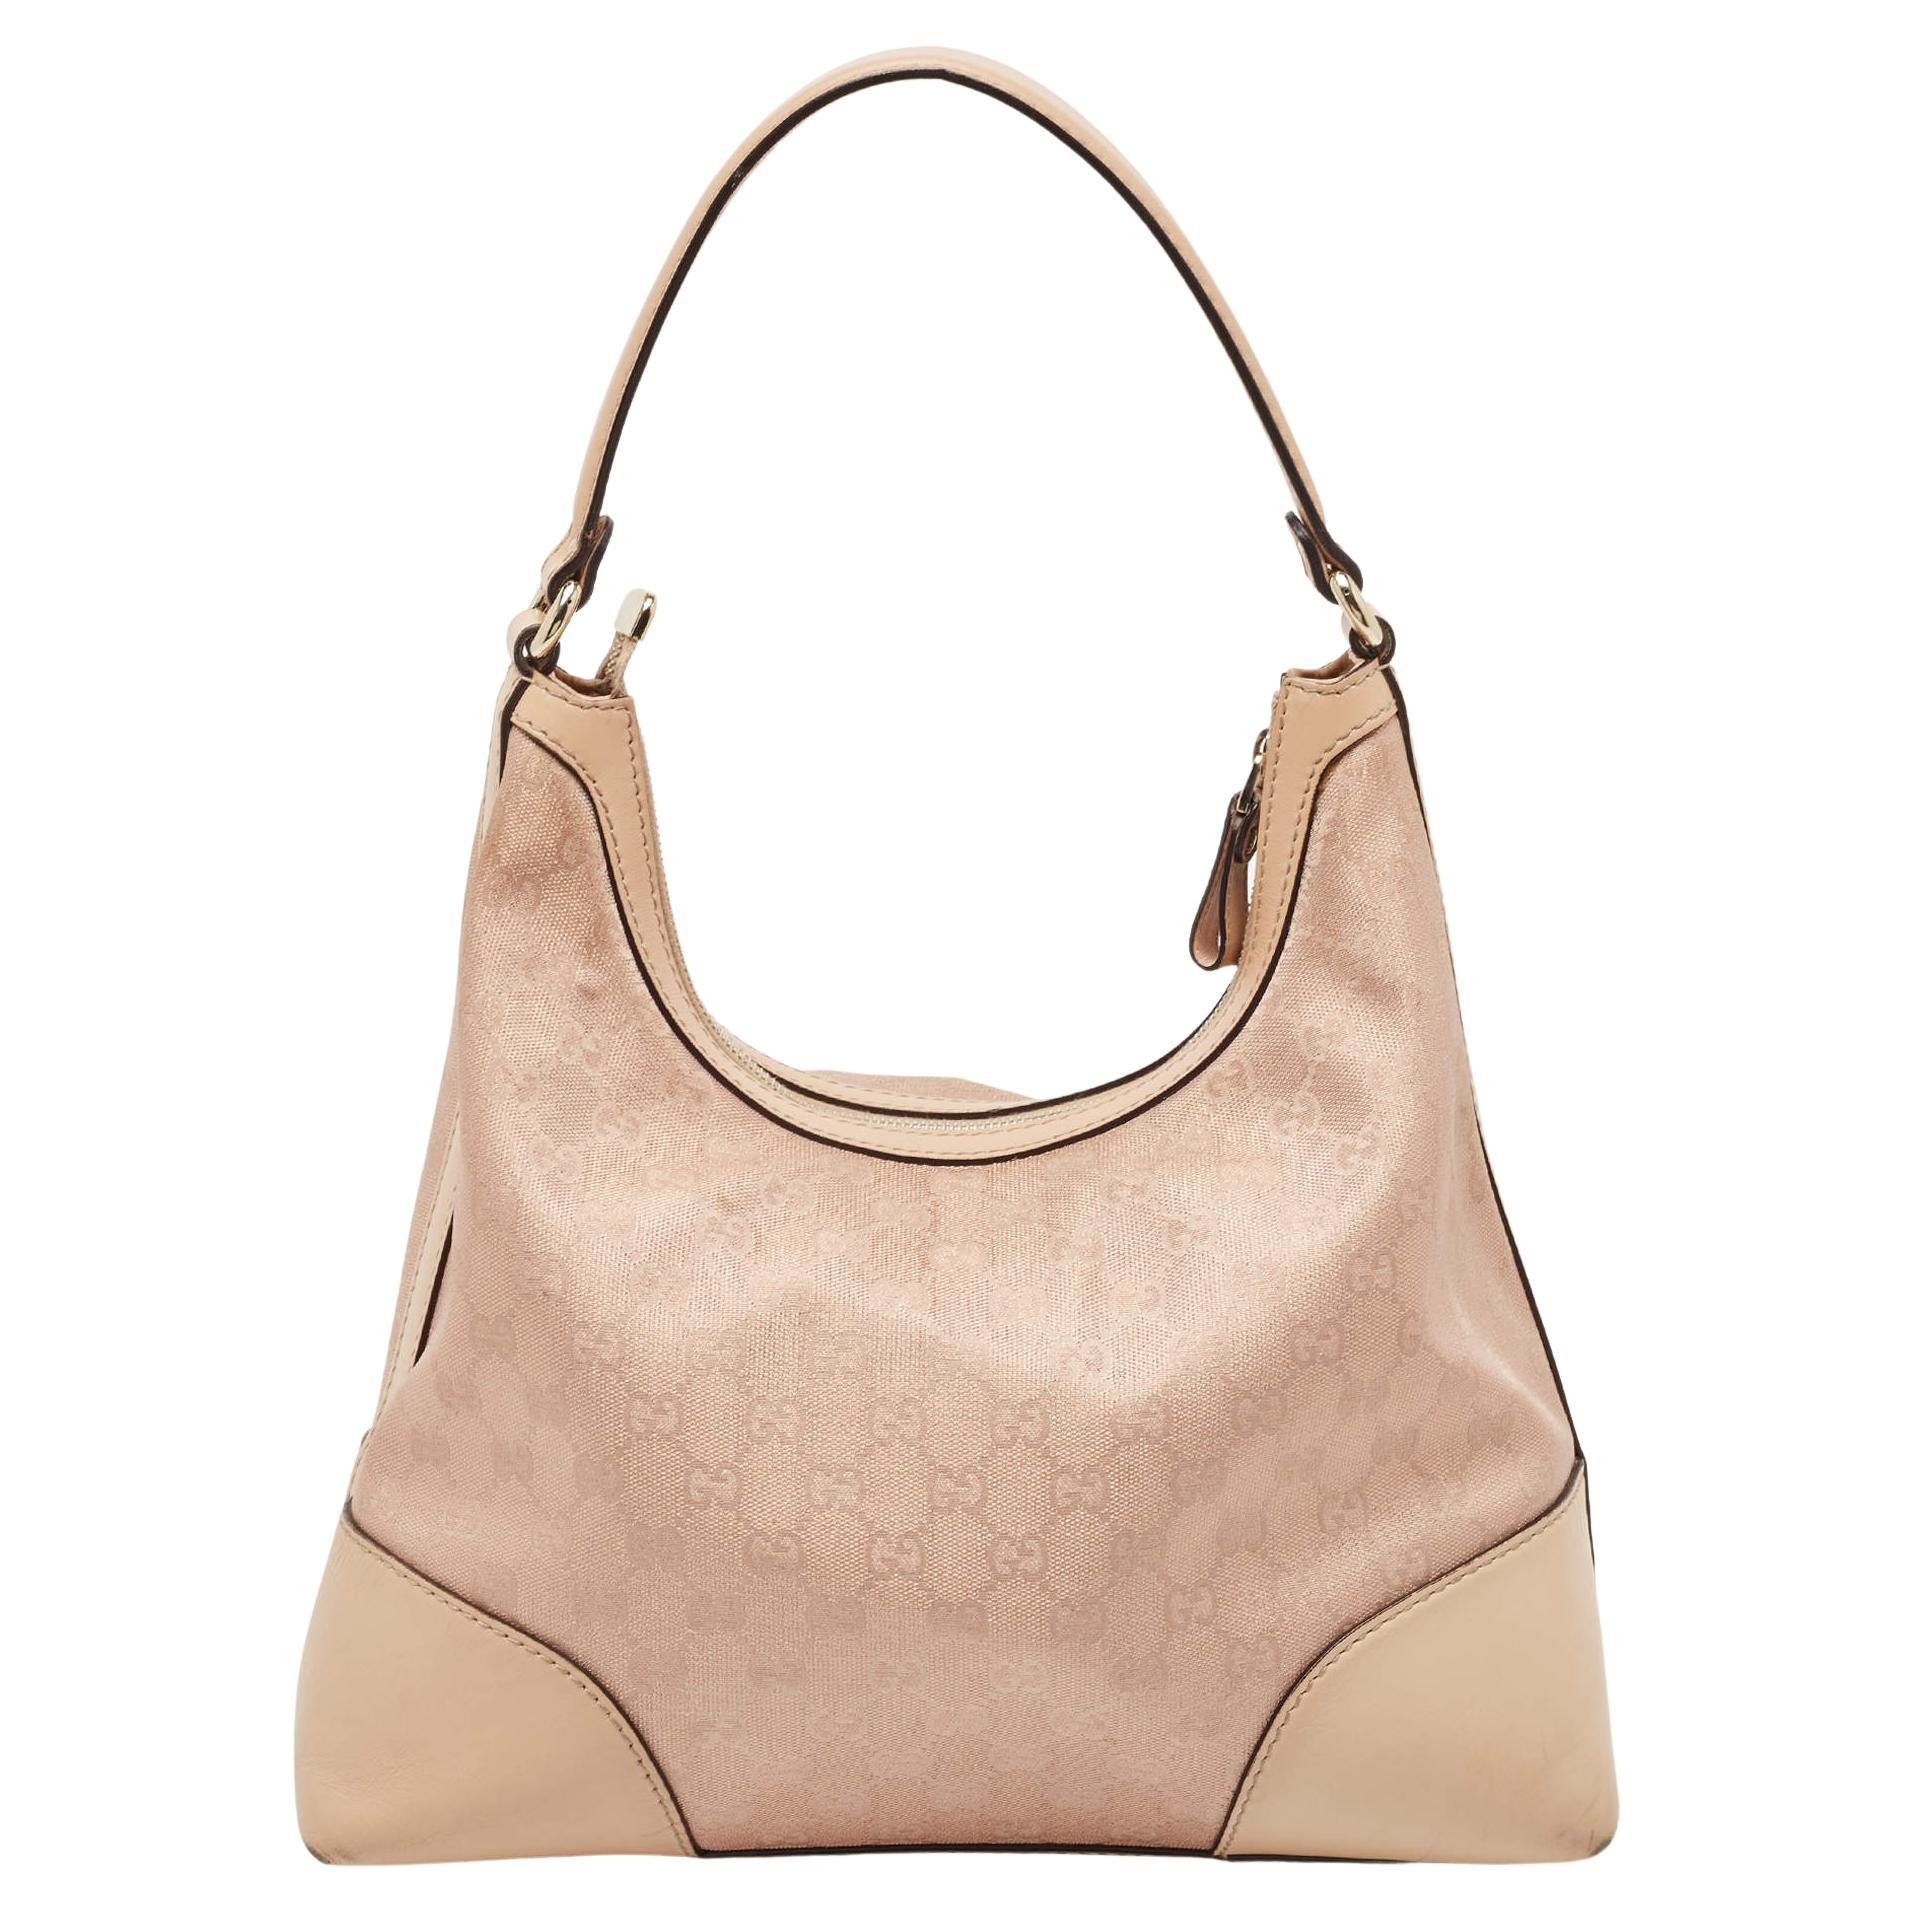 Gucci Beige/Metallic Pink GG Canvas and Leather Medium Lovely Hobo For Sale